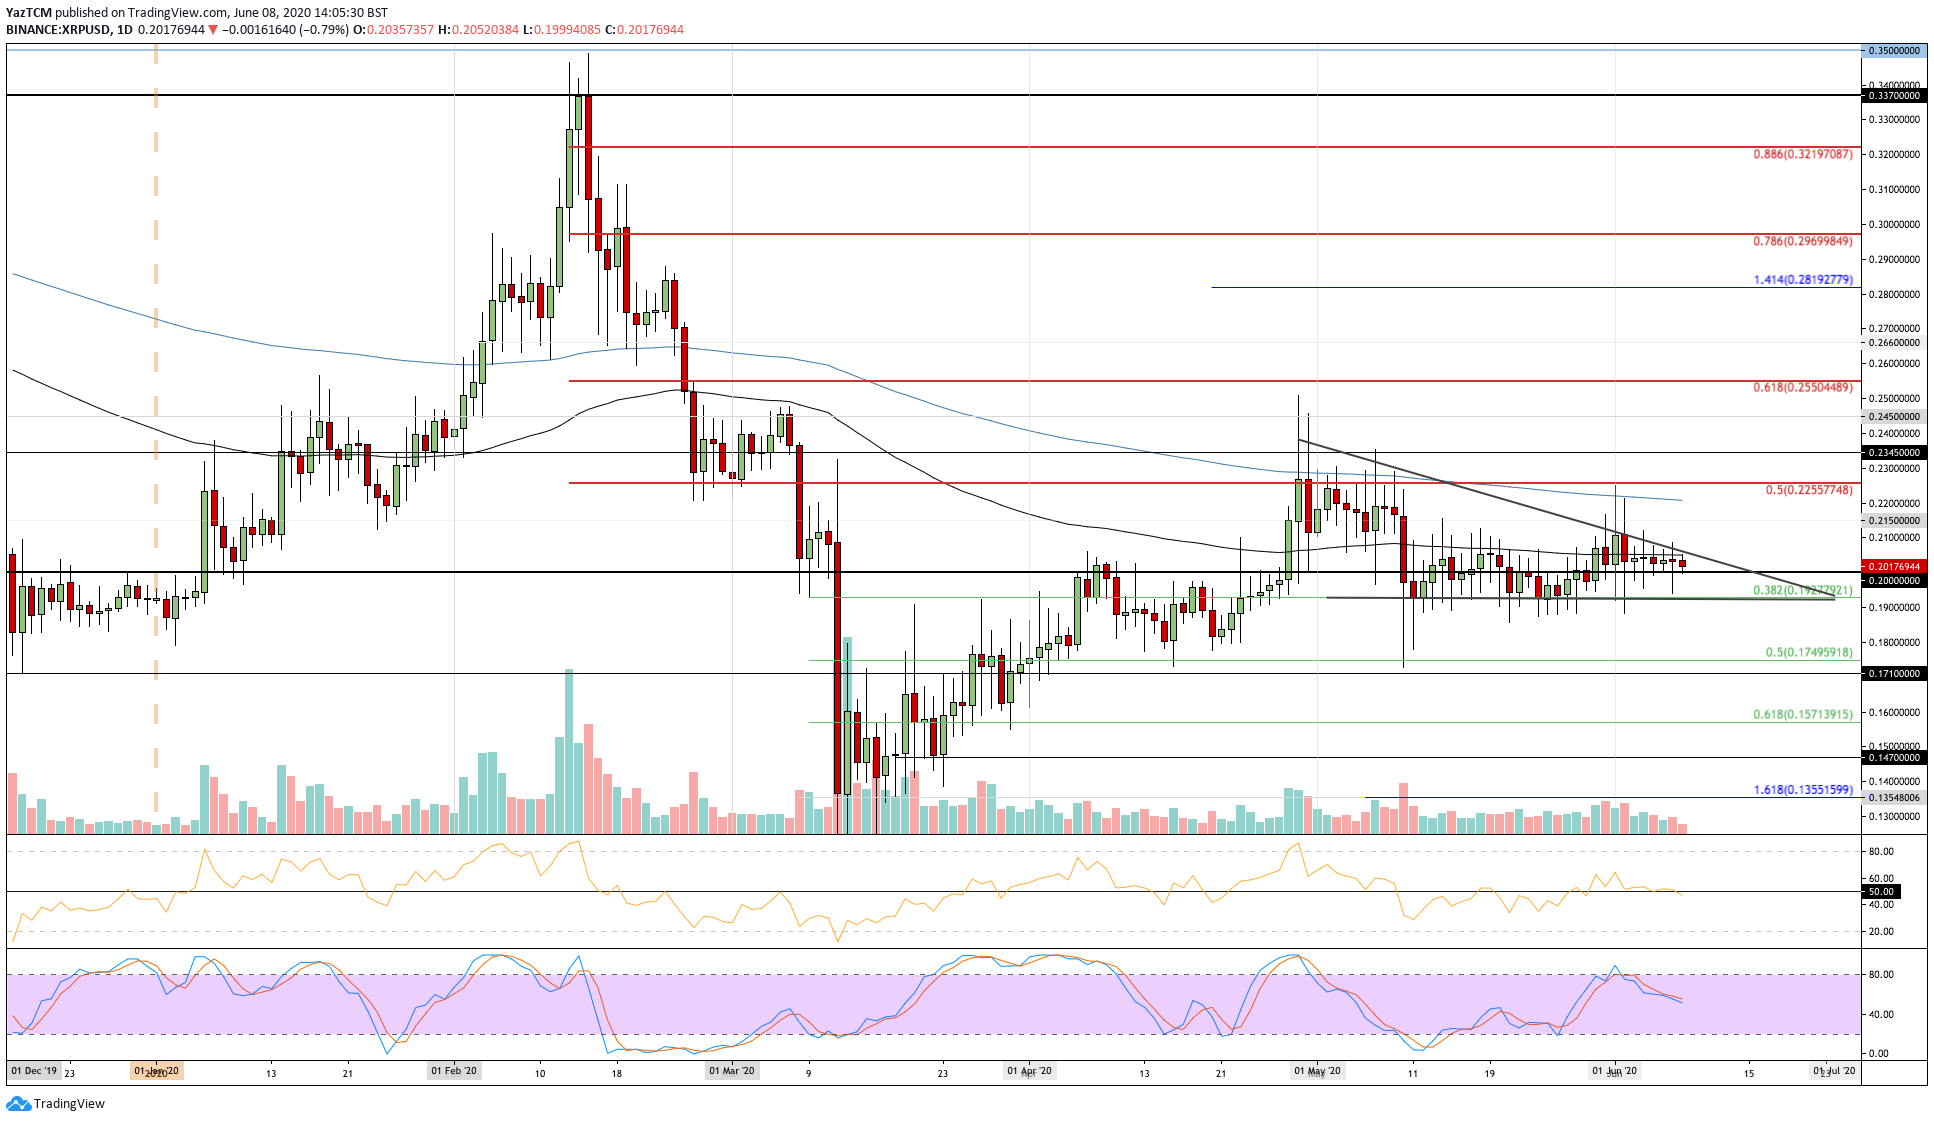 Ripple Price Analysis: Is XRP Transforming Into A Stablecoin? Stuck Around The $0.2 Range